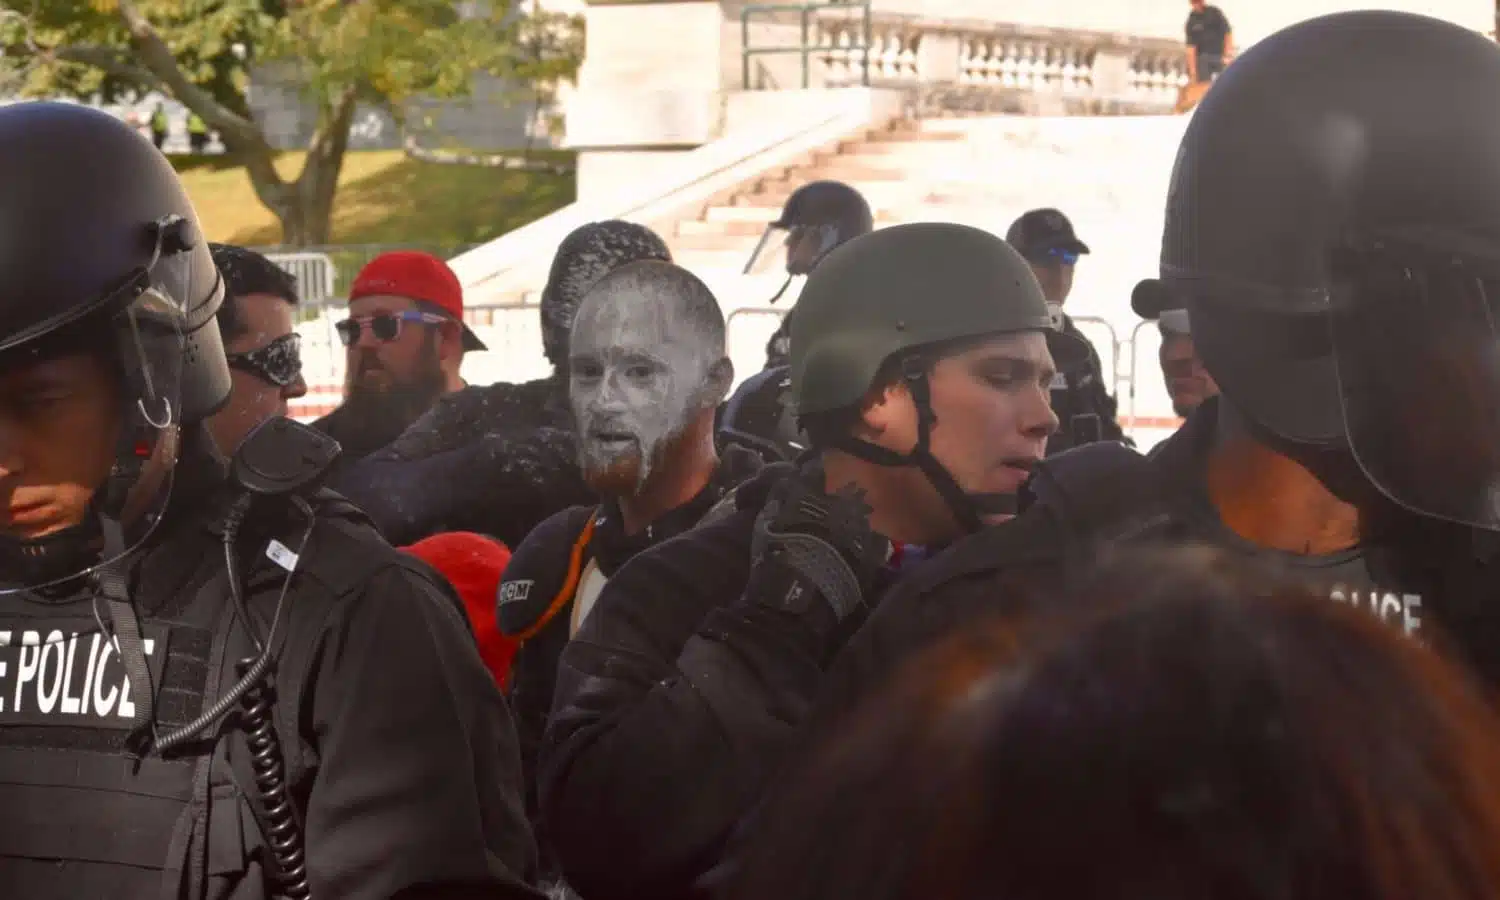 Bill to outlaw masks and protective gear at protests heard in House committee